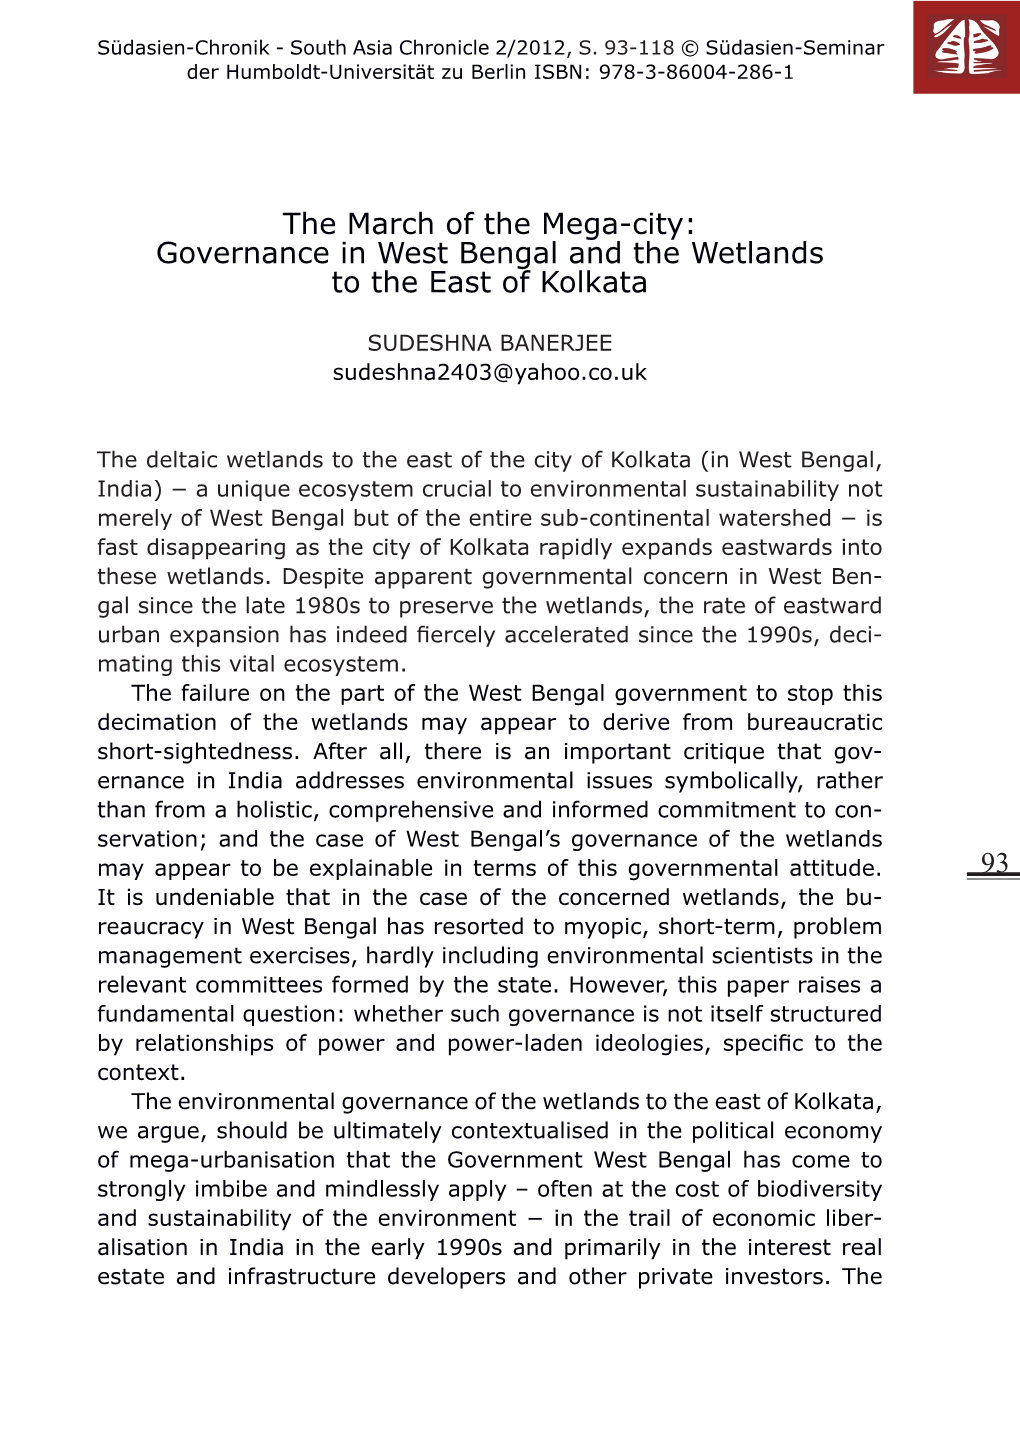 The March of the Mega-City: Governance in West Bengal and the Wetlands to the East of Kolkata